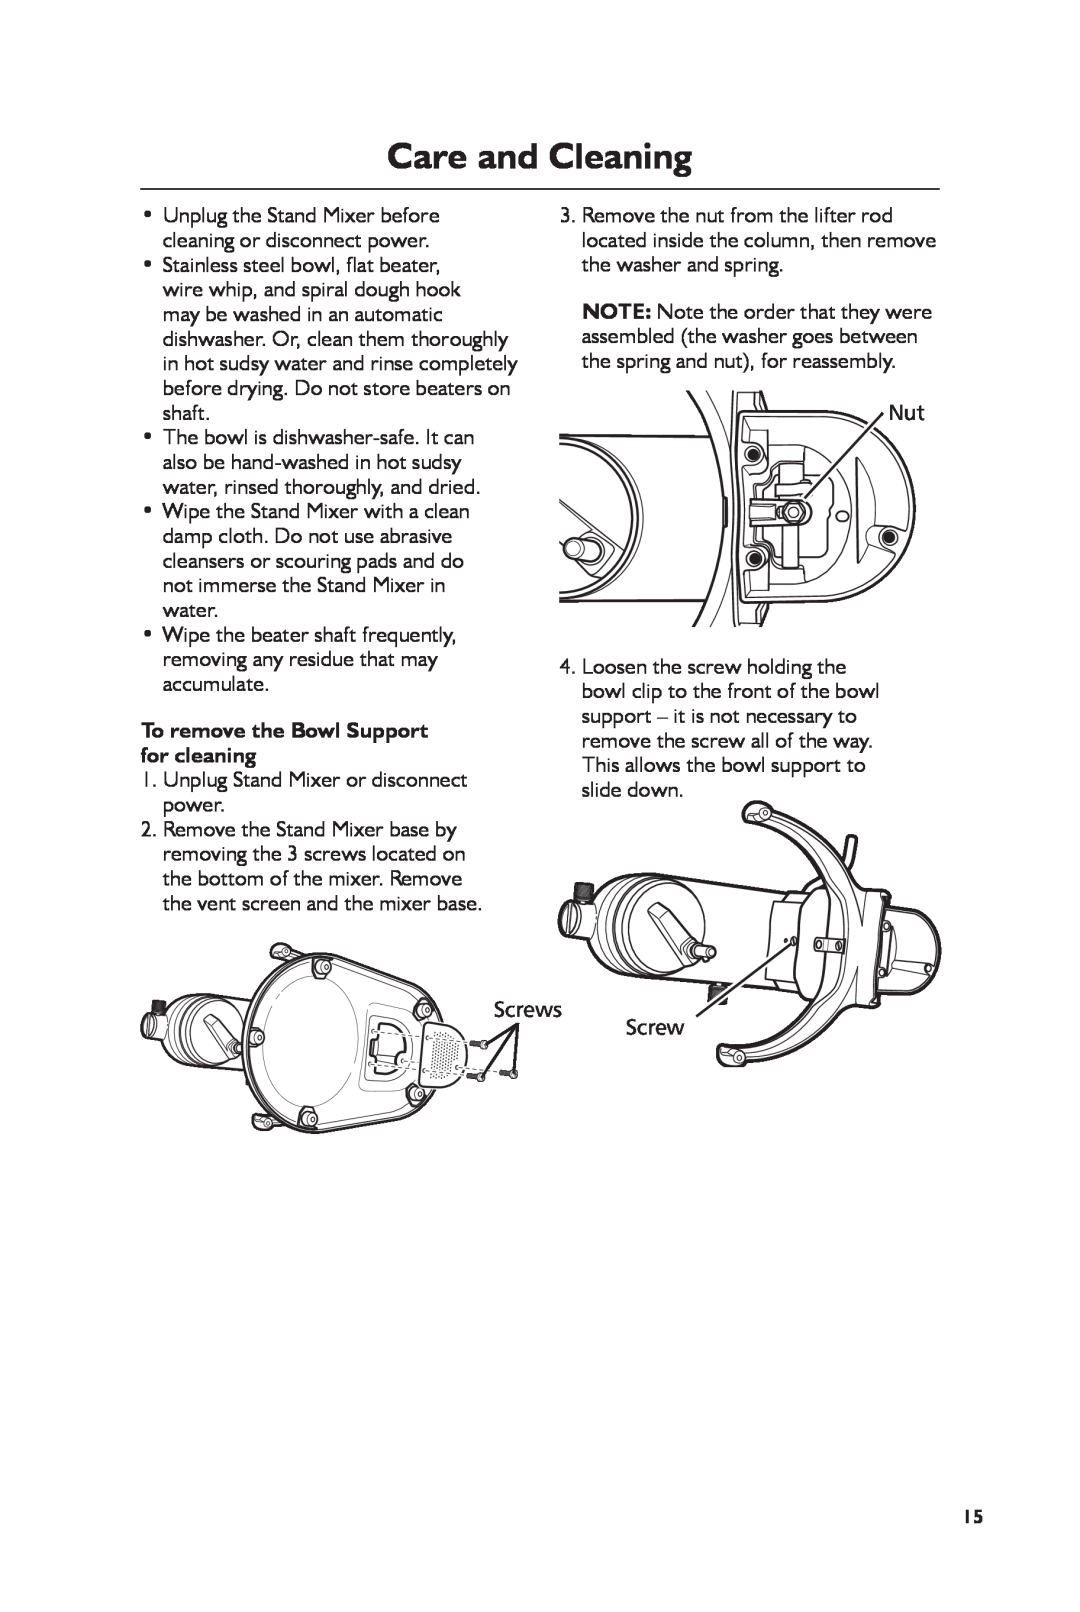 KitchenAid KSM7990 manual Care and Cleaning, To remove the Bowl Support for cleaning 